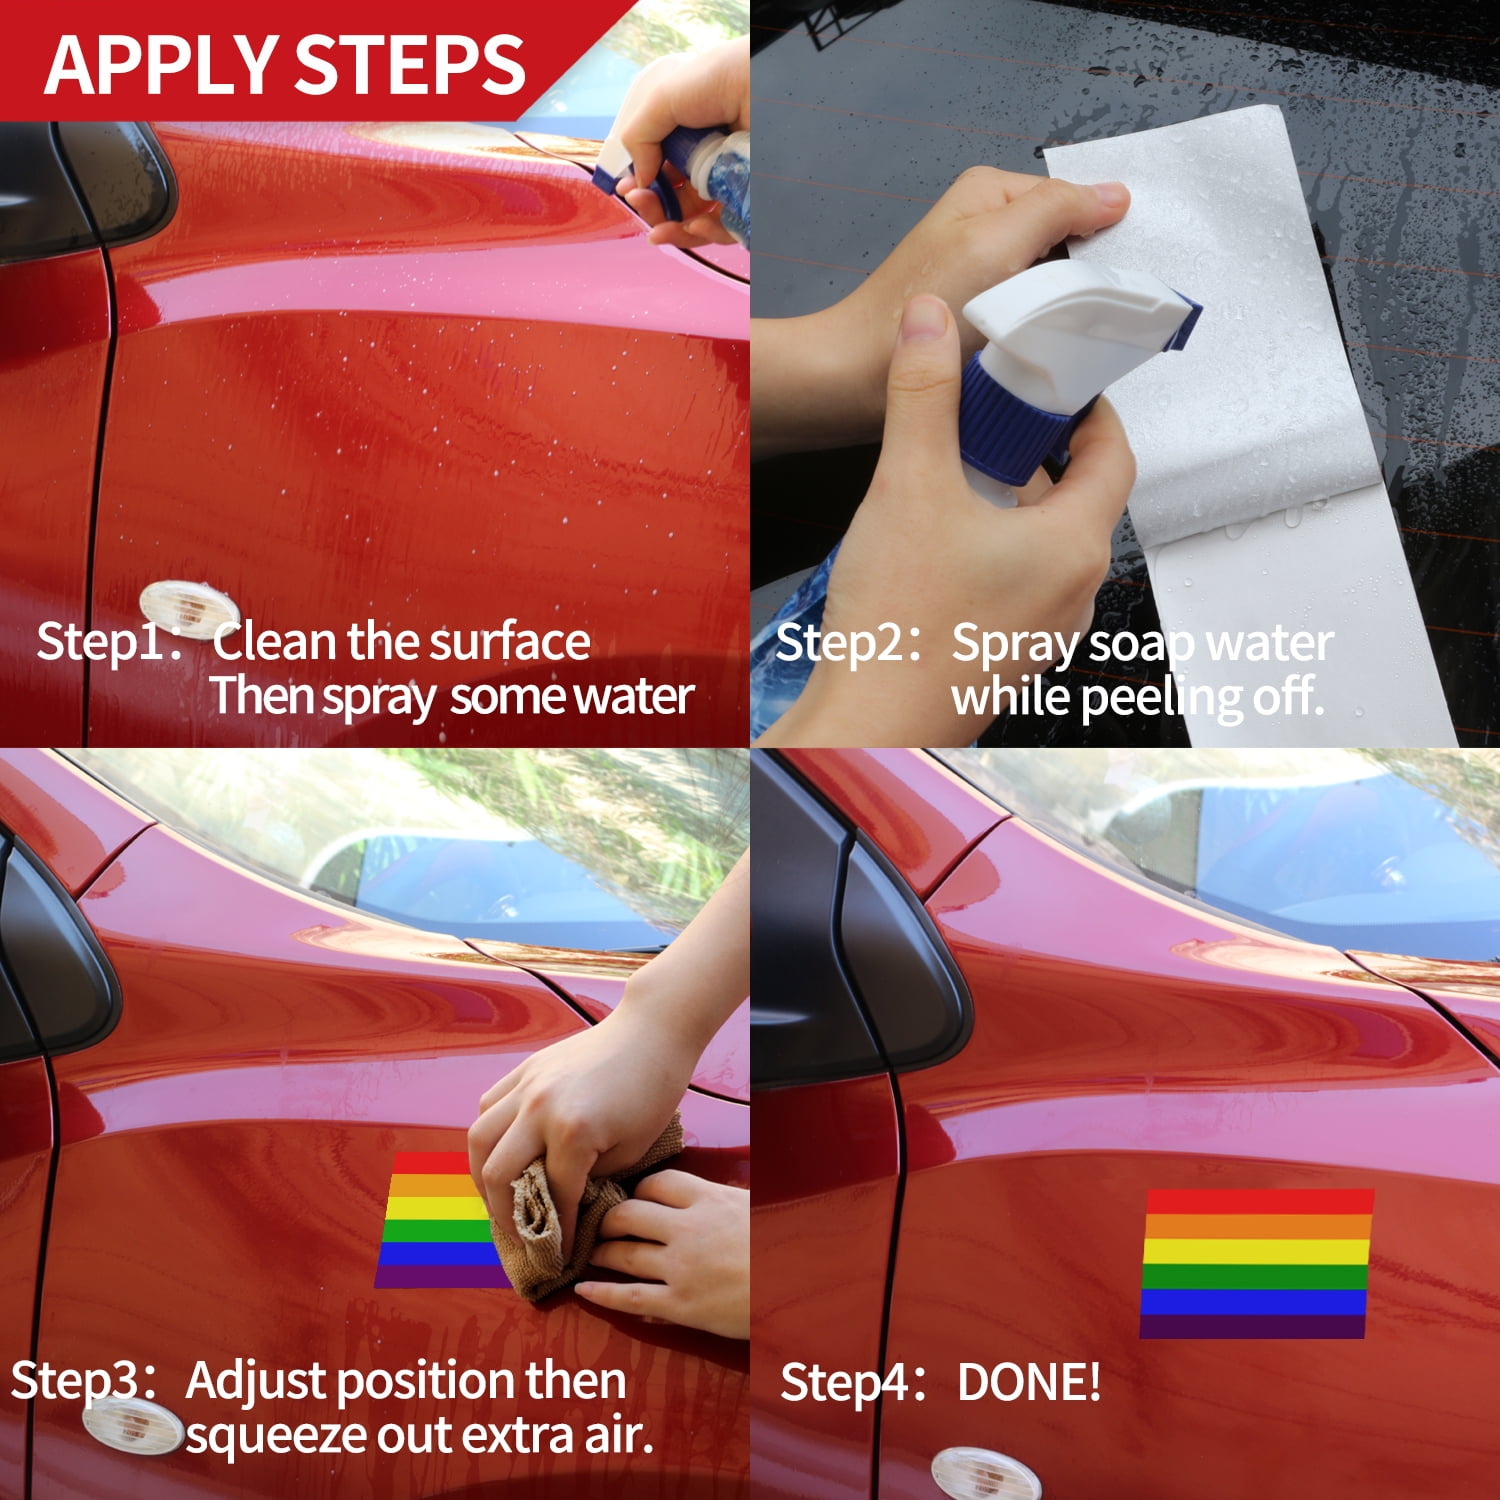 3 Pack 3 x 5 inch Car Sticker Support Gay Pride Lesbian Bisexual Transgender 3M Vinyl Window Bumper Tape Mosteck Reflective Stickers Rainbow Decal for Cars & Trucks 